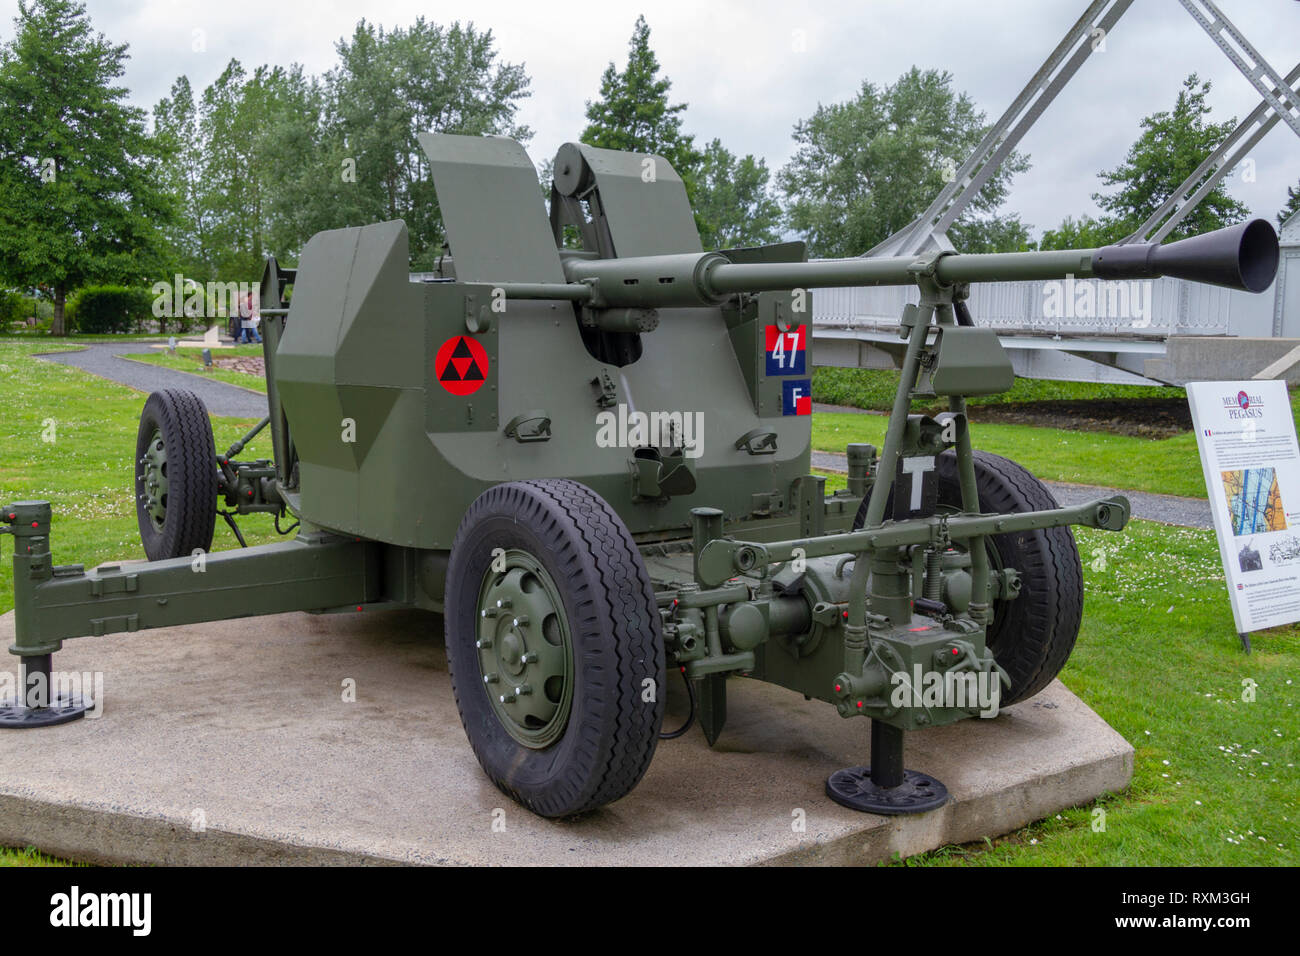 A Bofors 40mm light anti-aircraft gun on display at the Pegasus Museum in Normandy, France. Stock Photo